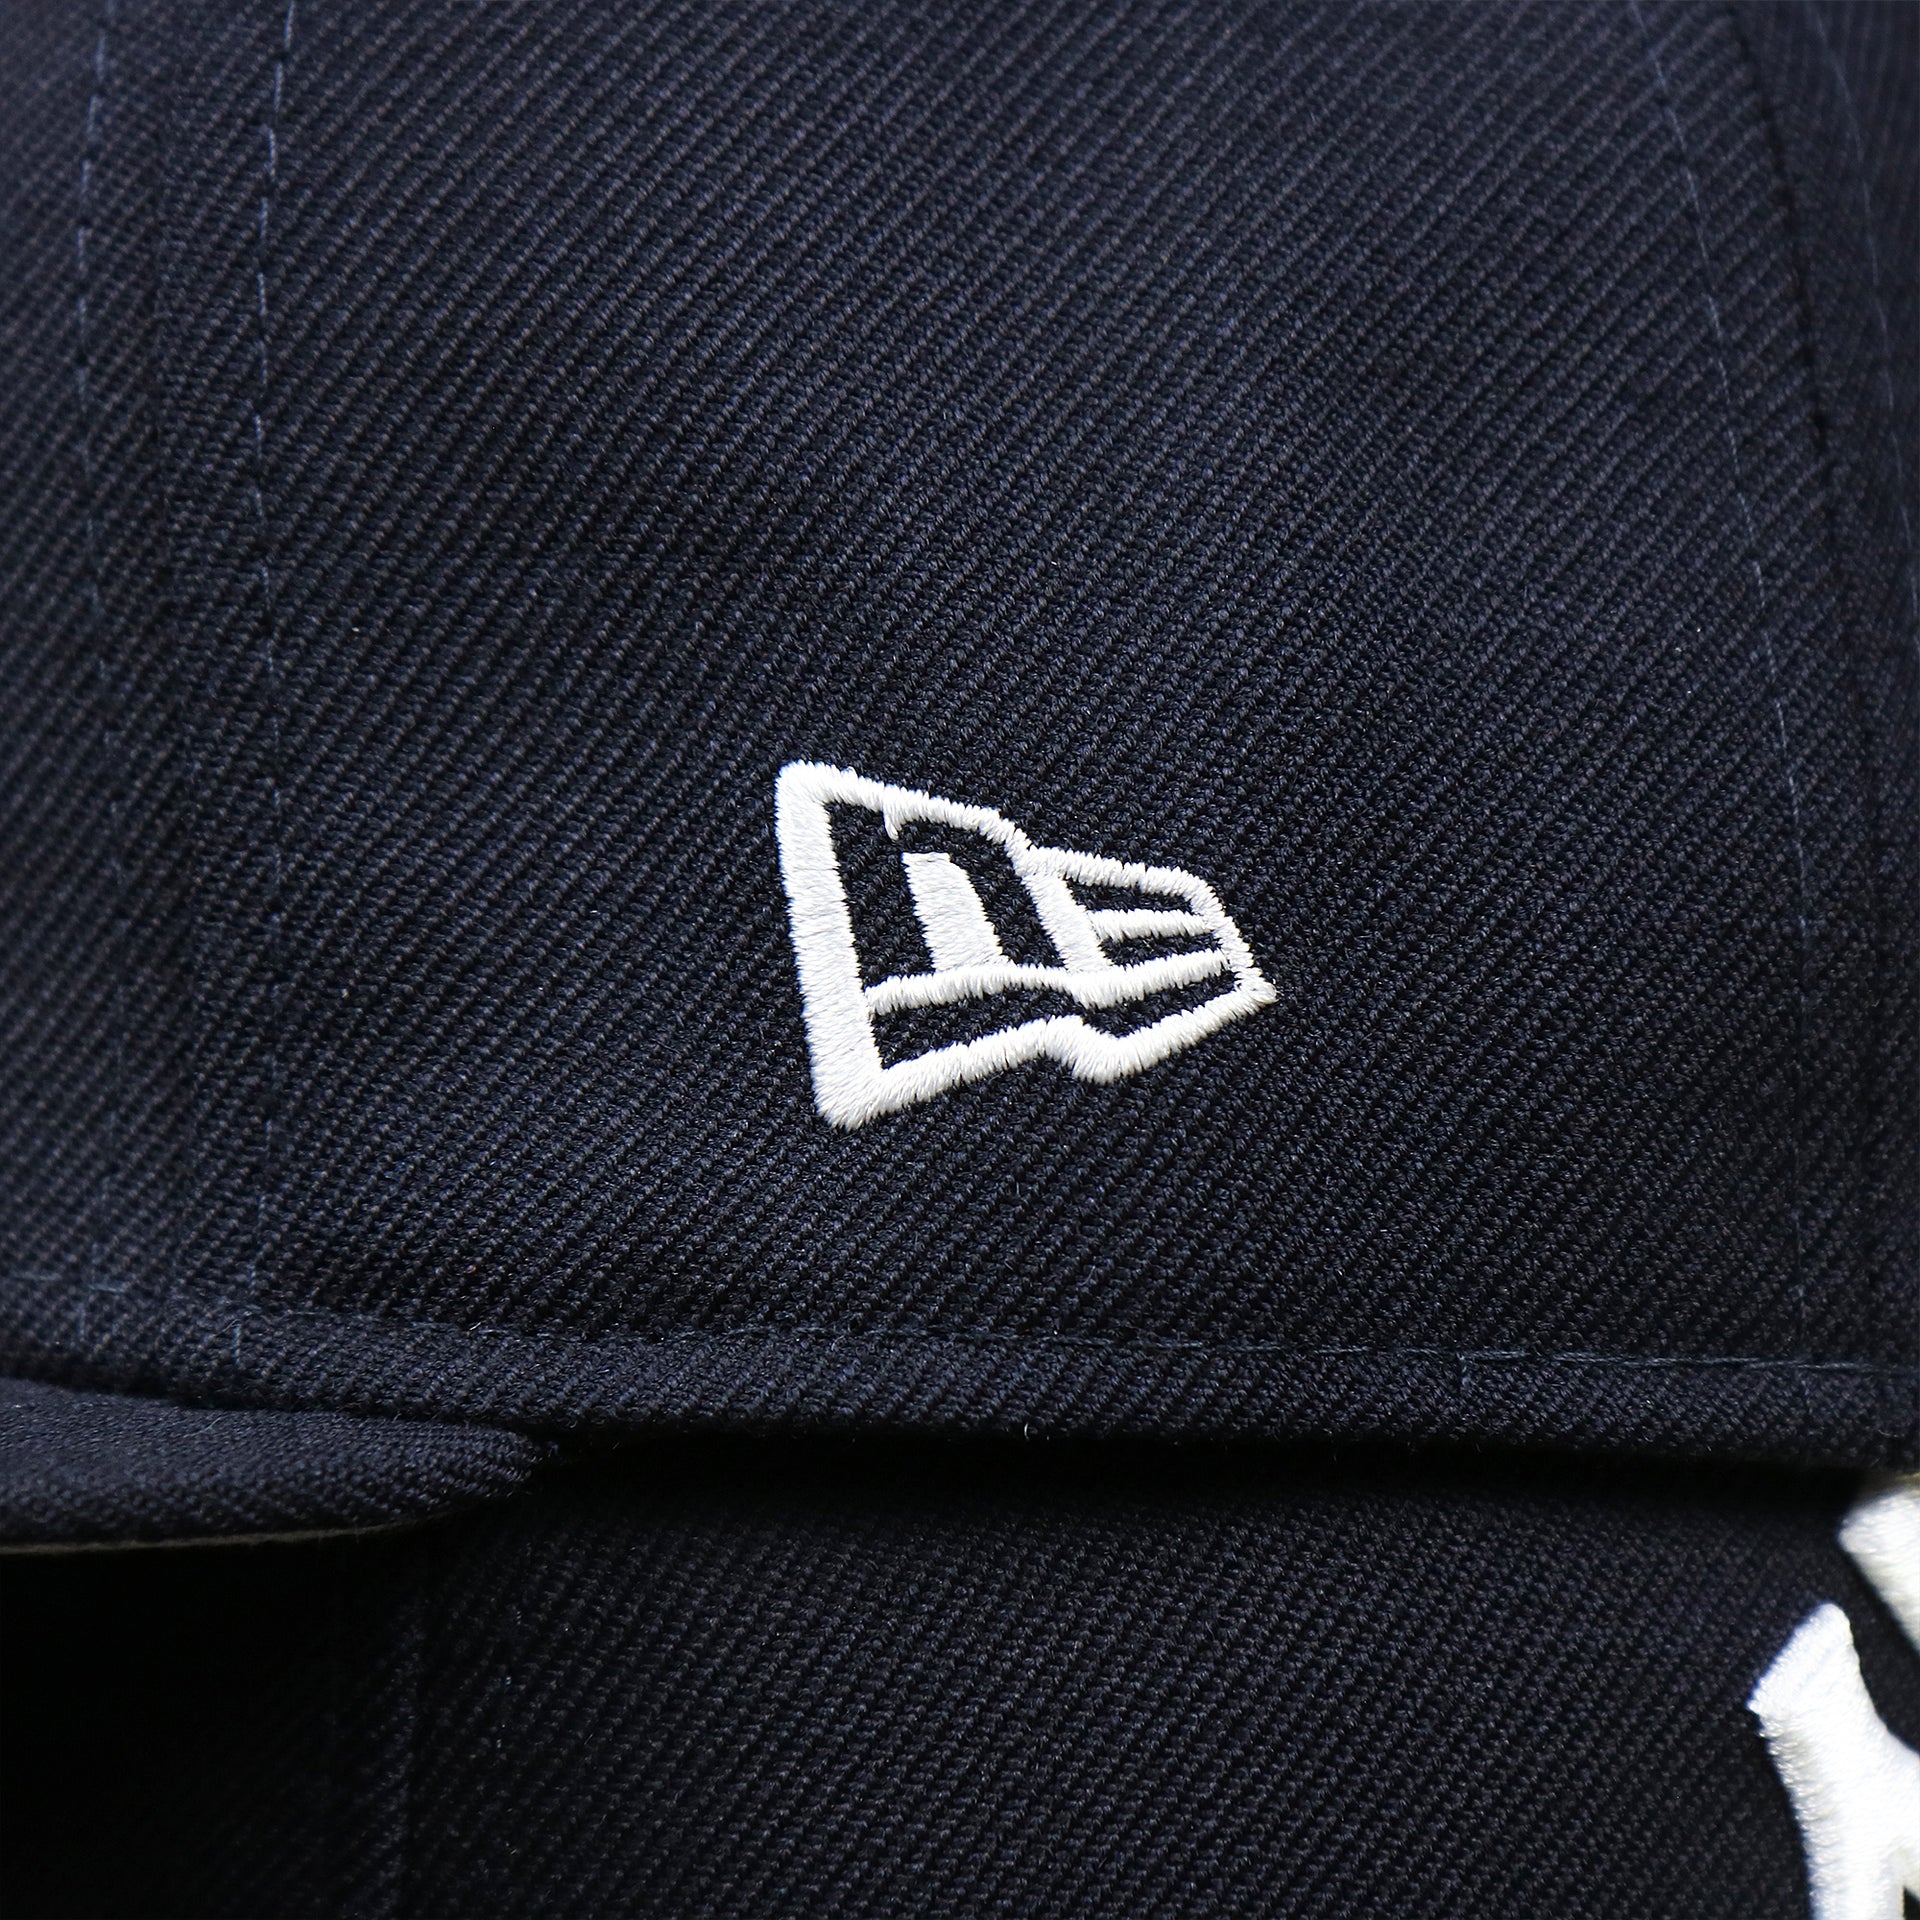 The New Era Logo on the New York Yankees Gray Bottom Wool 59Fifty Fitted Cap | Navy Blue 59Fifty Cap